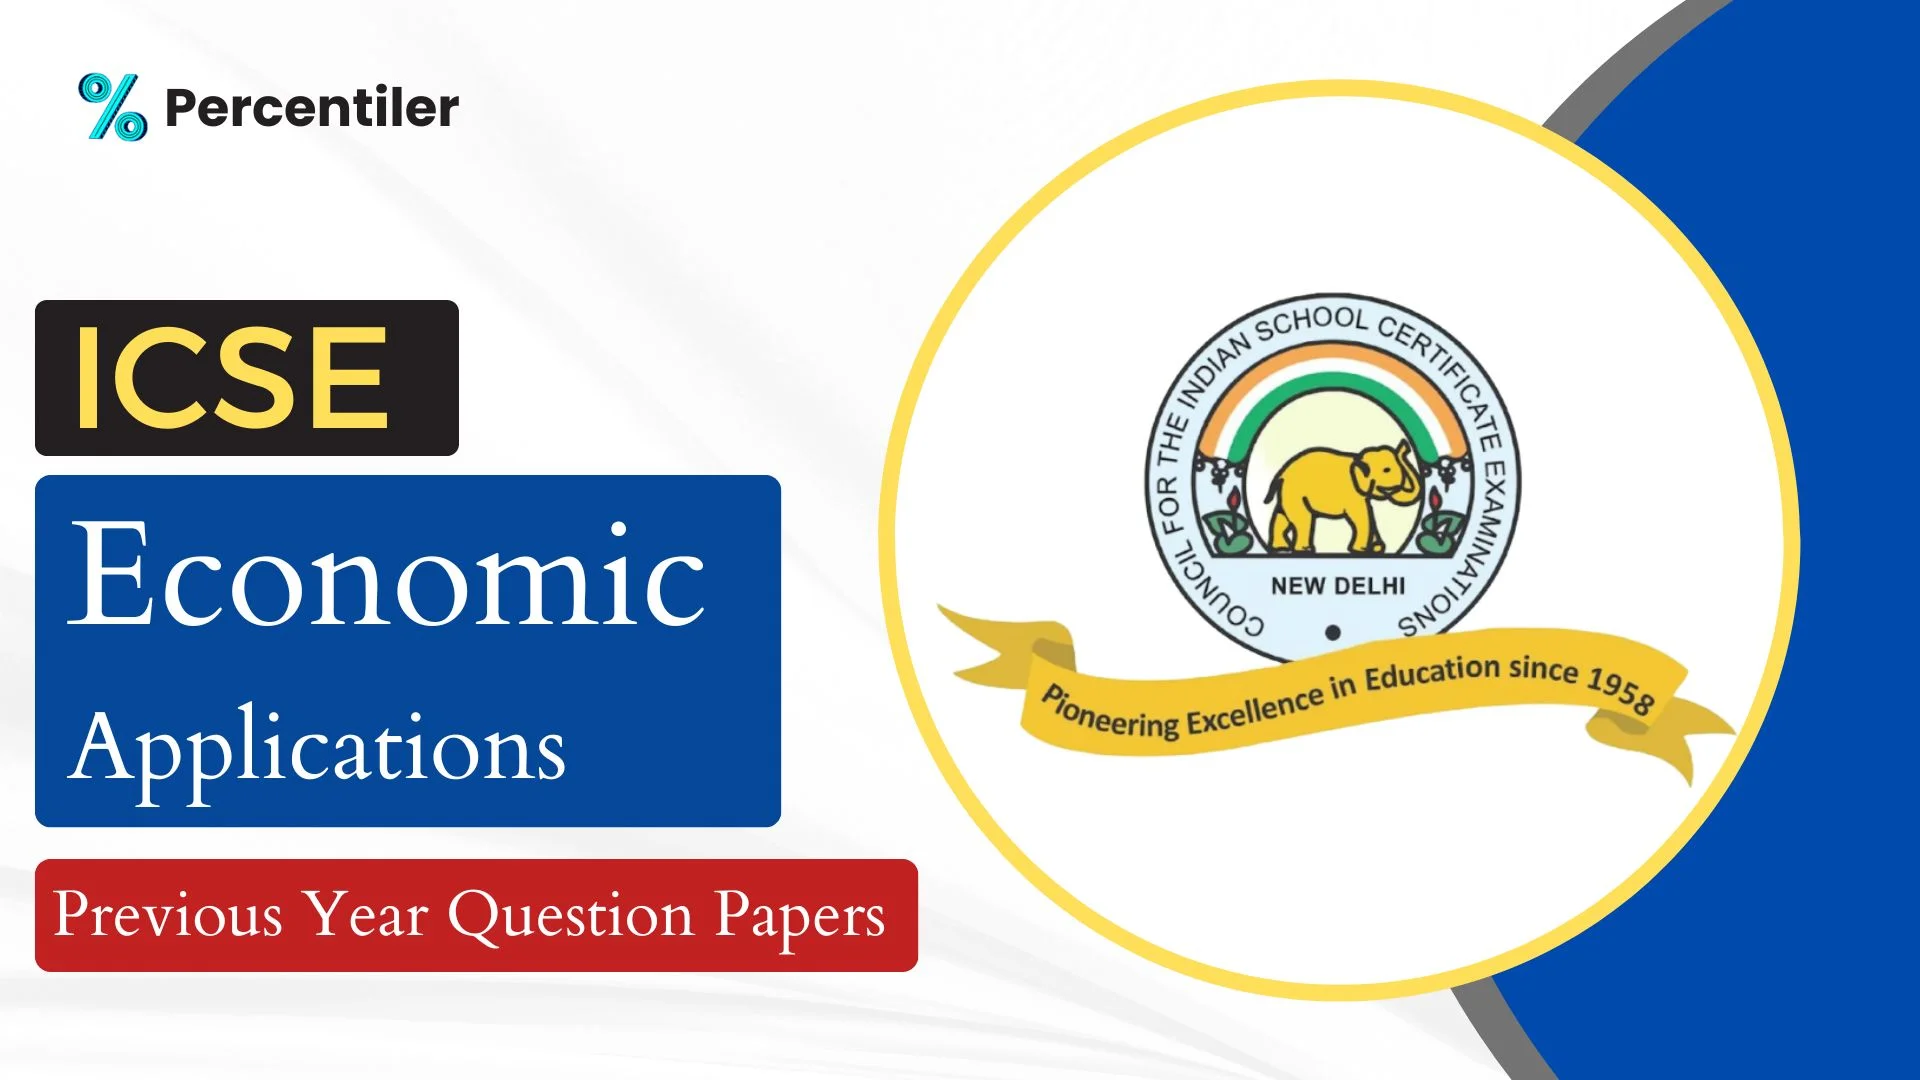 ICSE Economic Application Previous Year Question Papers